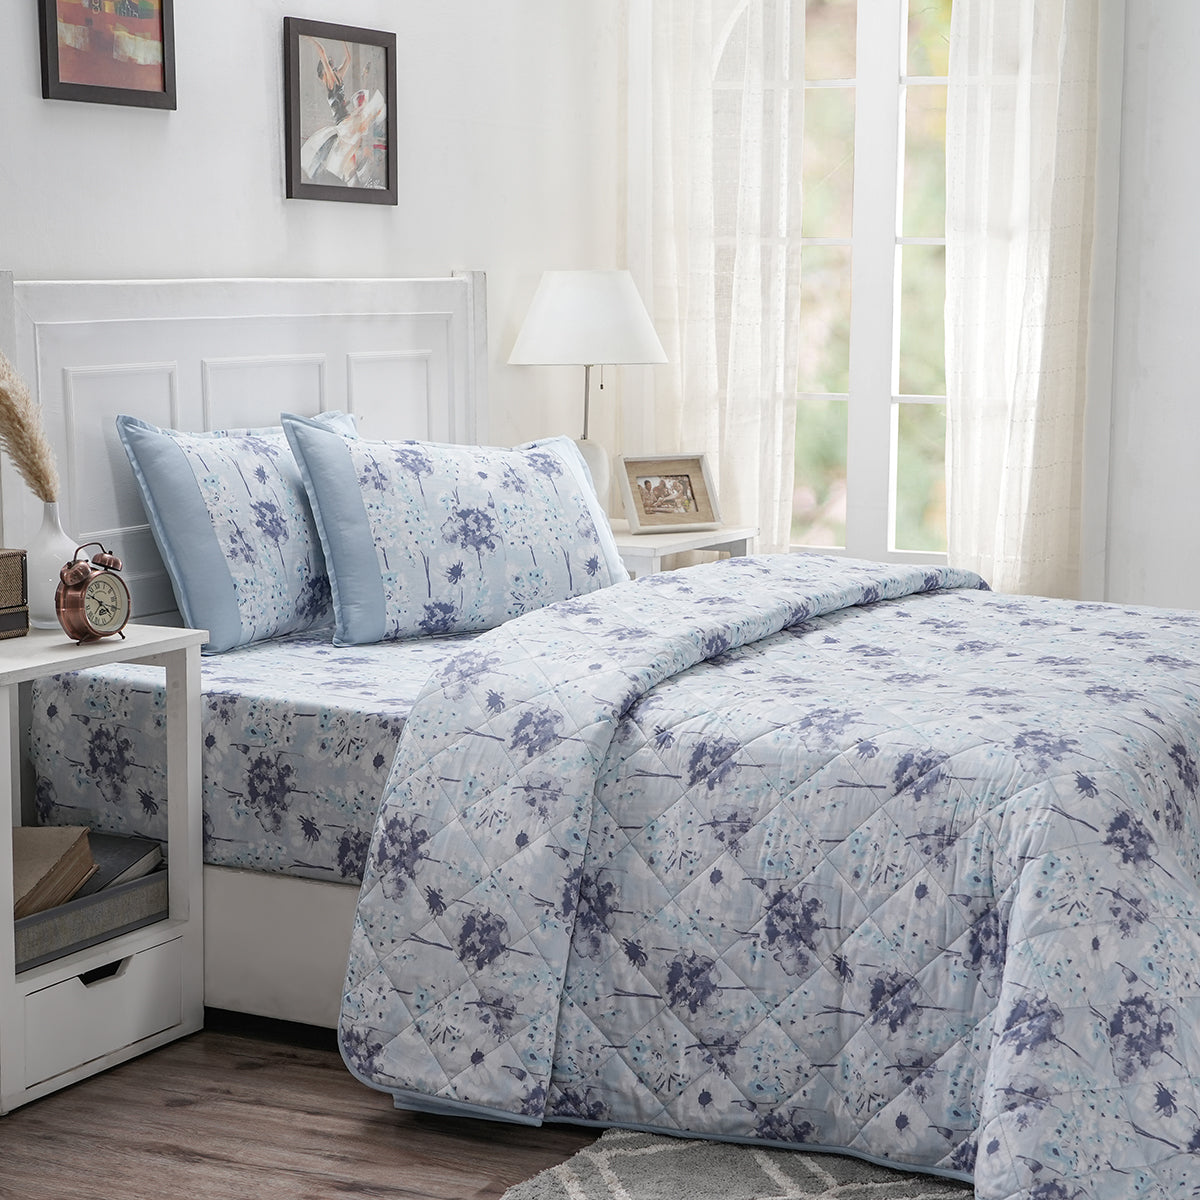 Optimist Bloom Spongy Floral 4PC Quilt/Quilted Bed Cover Set